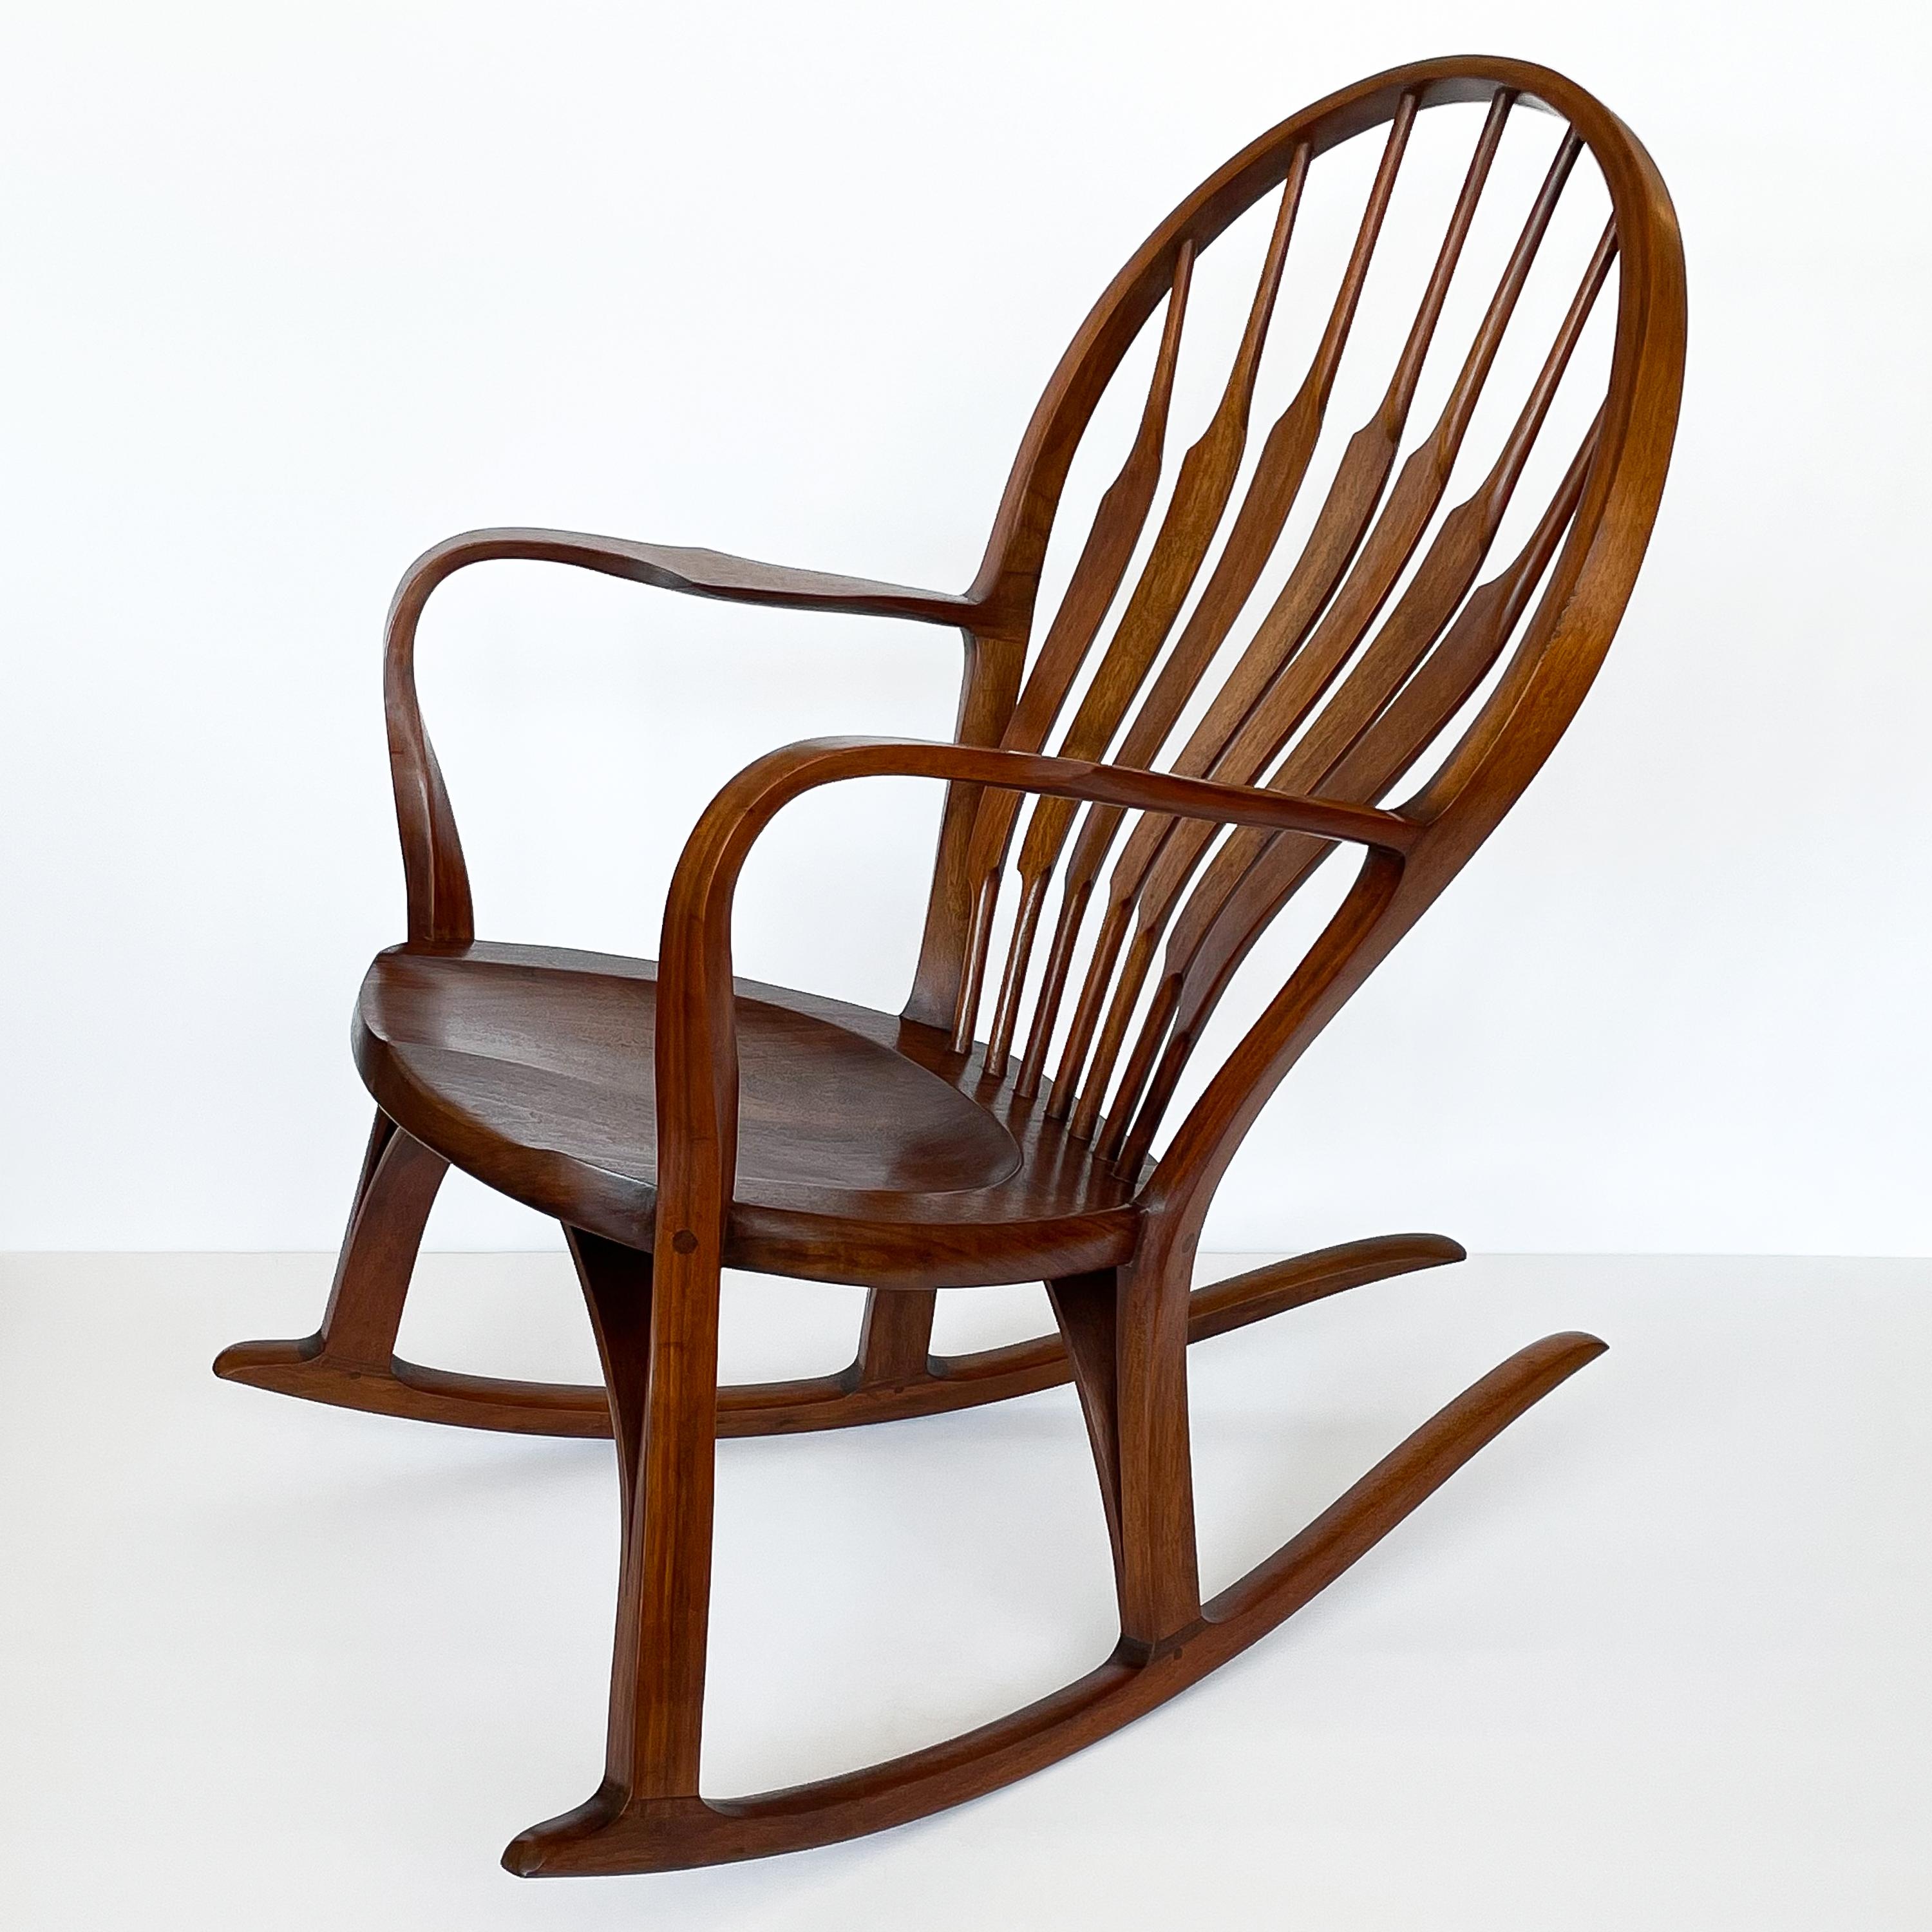 A sculptural handmade American studio craft walnut rocking chair by Steven Foley, circa 1978. This rocking chair features a horseshoe shaped back with 6 sculpted hand carved curved slats that is reminiscent of a Wegner peacock chair. Long curved